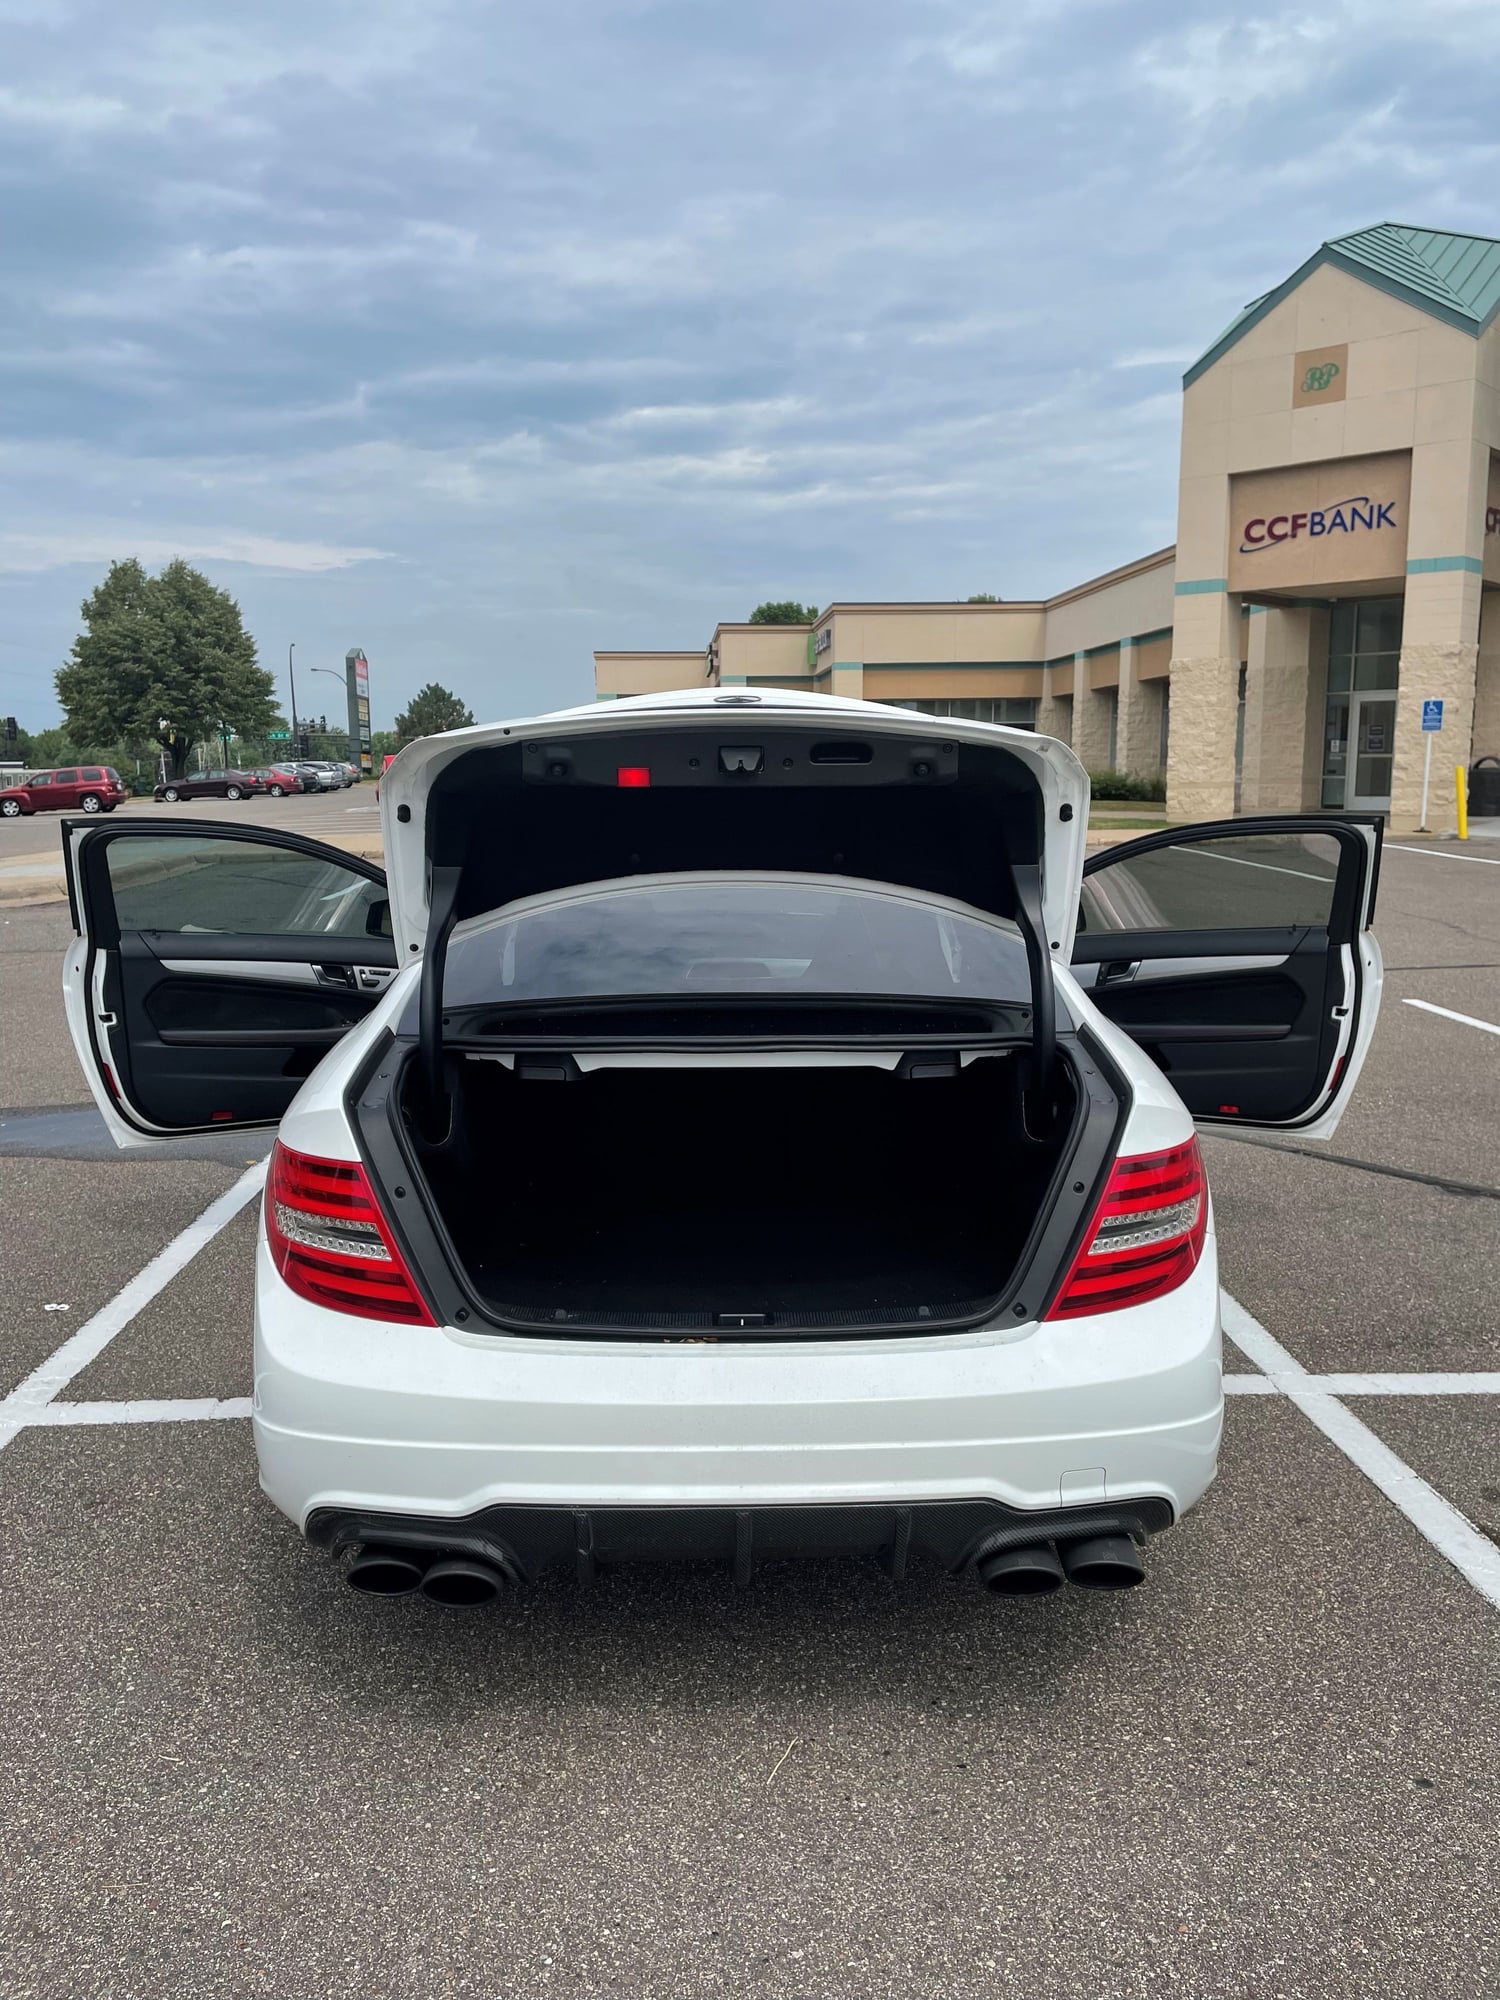 2013 Mercedes-Benz C250 - 2013 C250 - 82K miles, Armytrix Valvetronic Quad Exhaust, 2 sets of AMG rims, + more - Used - VIN WDDGJ4HB1DF963488 - 82,000 Miles - 4 cyl - 2WD - Automatic - Coupe - White - Oakdale, MN 55128, United States